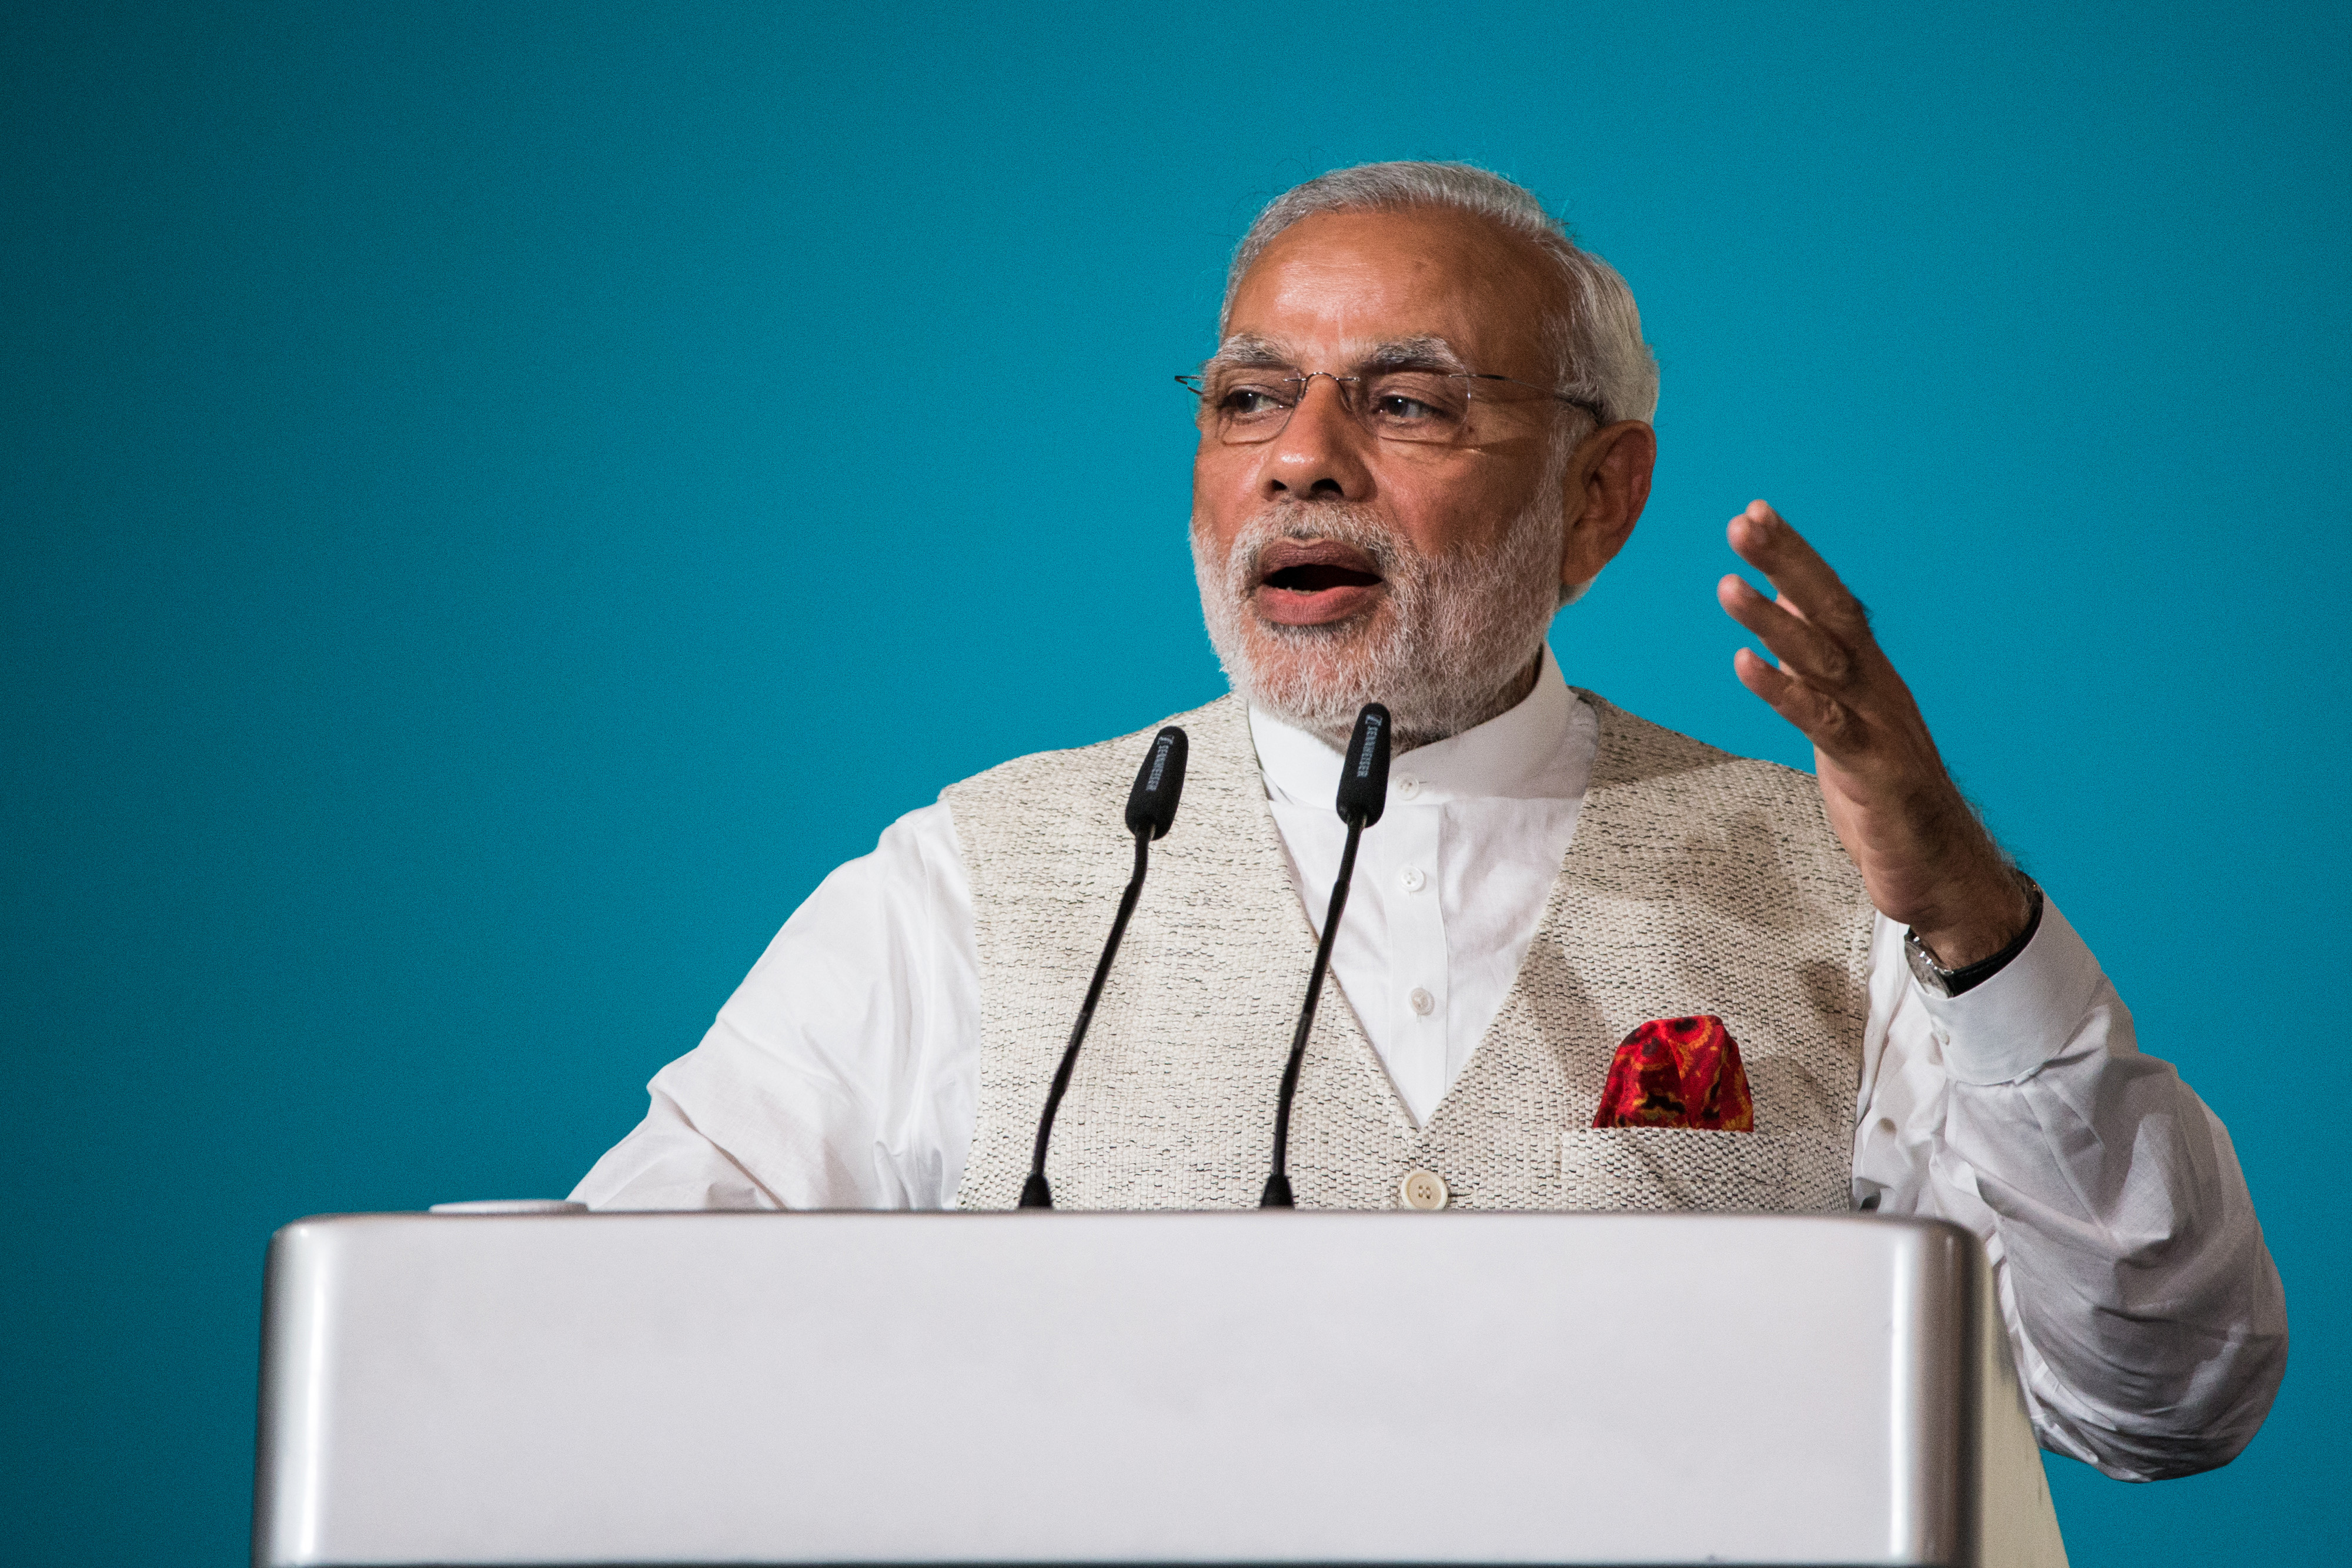 Narendra Modi, India's prime minister, gestures whilst speaking during the 37th Singapore Lecture held at the Shangri-La Hotel in Singapore, on Monday, Nov. 23, 2015. (Nicky Loh–Bloomberg/Getty Images)